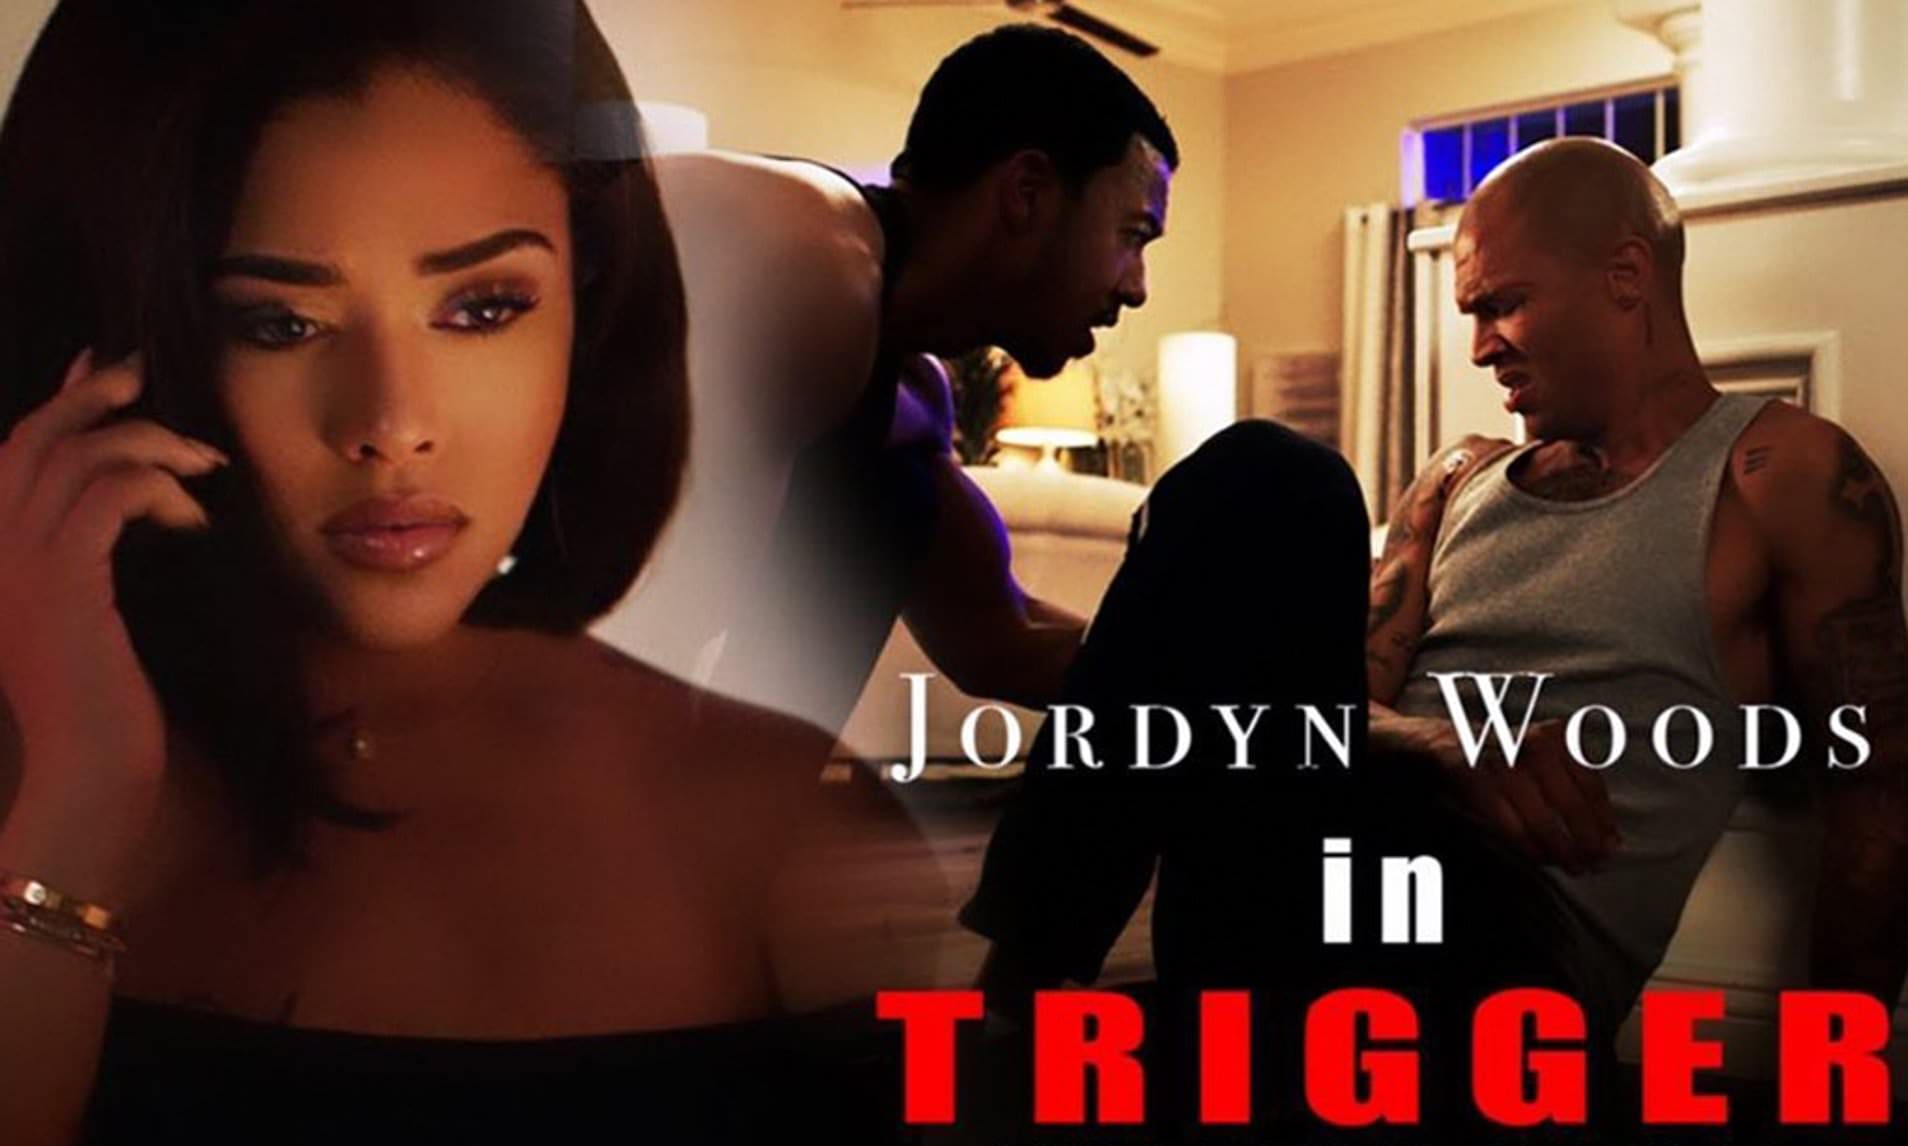 Jordyn Woods Makes Fans Proud After Sharing This Trailer For The Movie 'Trigger'